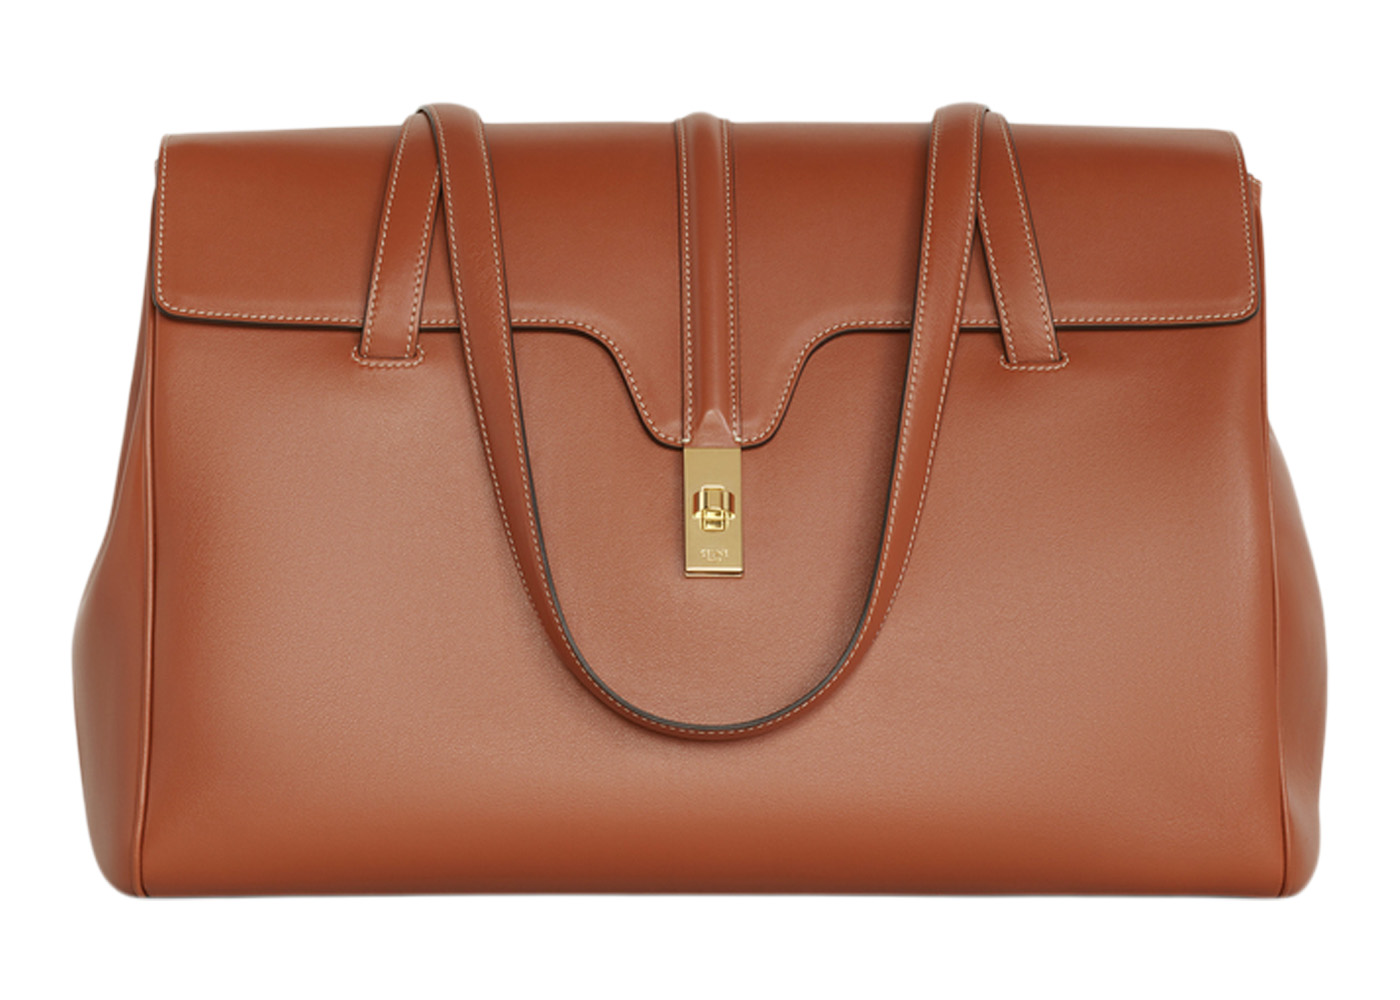 Celine Soft 16 Bag Large Tan in Smooth Calfskin Leather with Gold